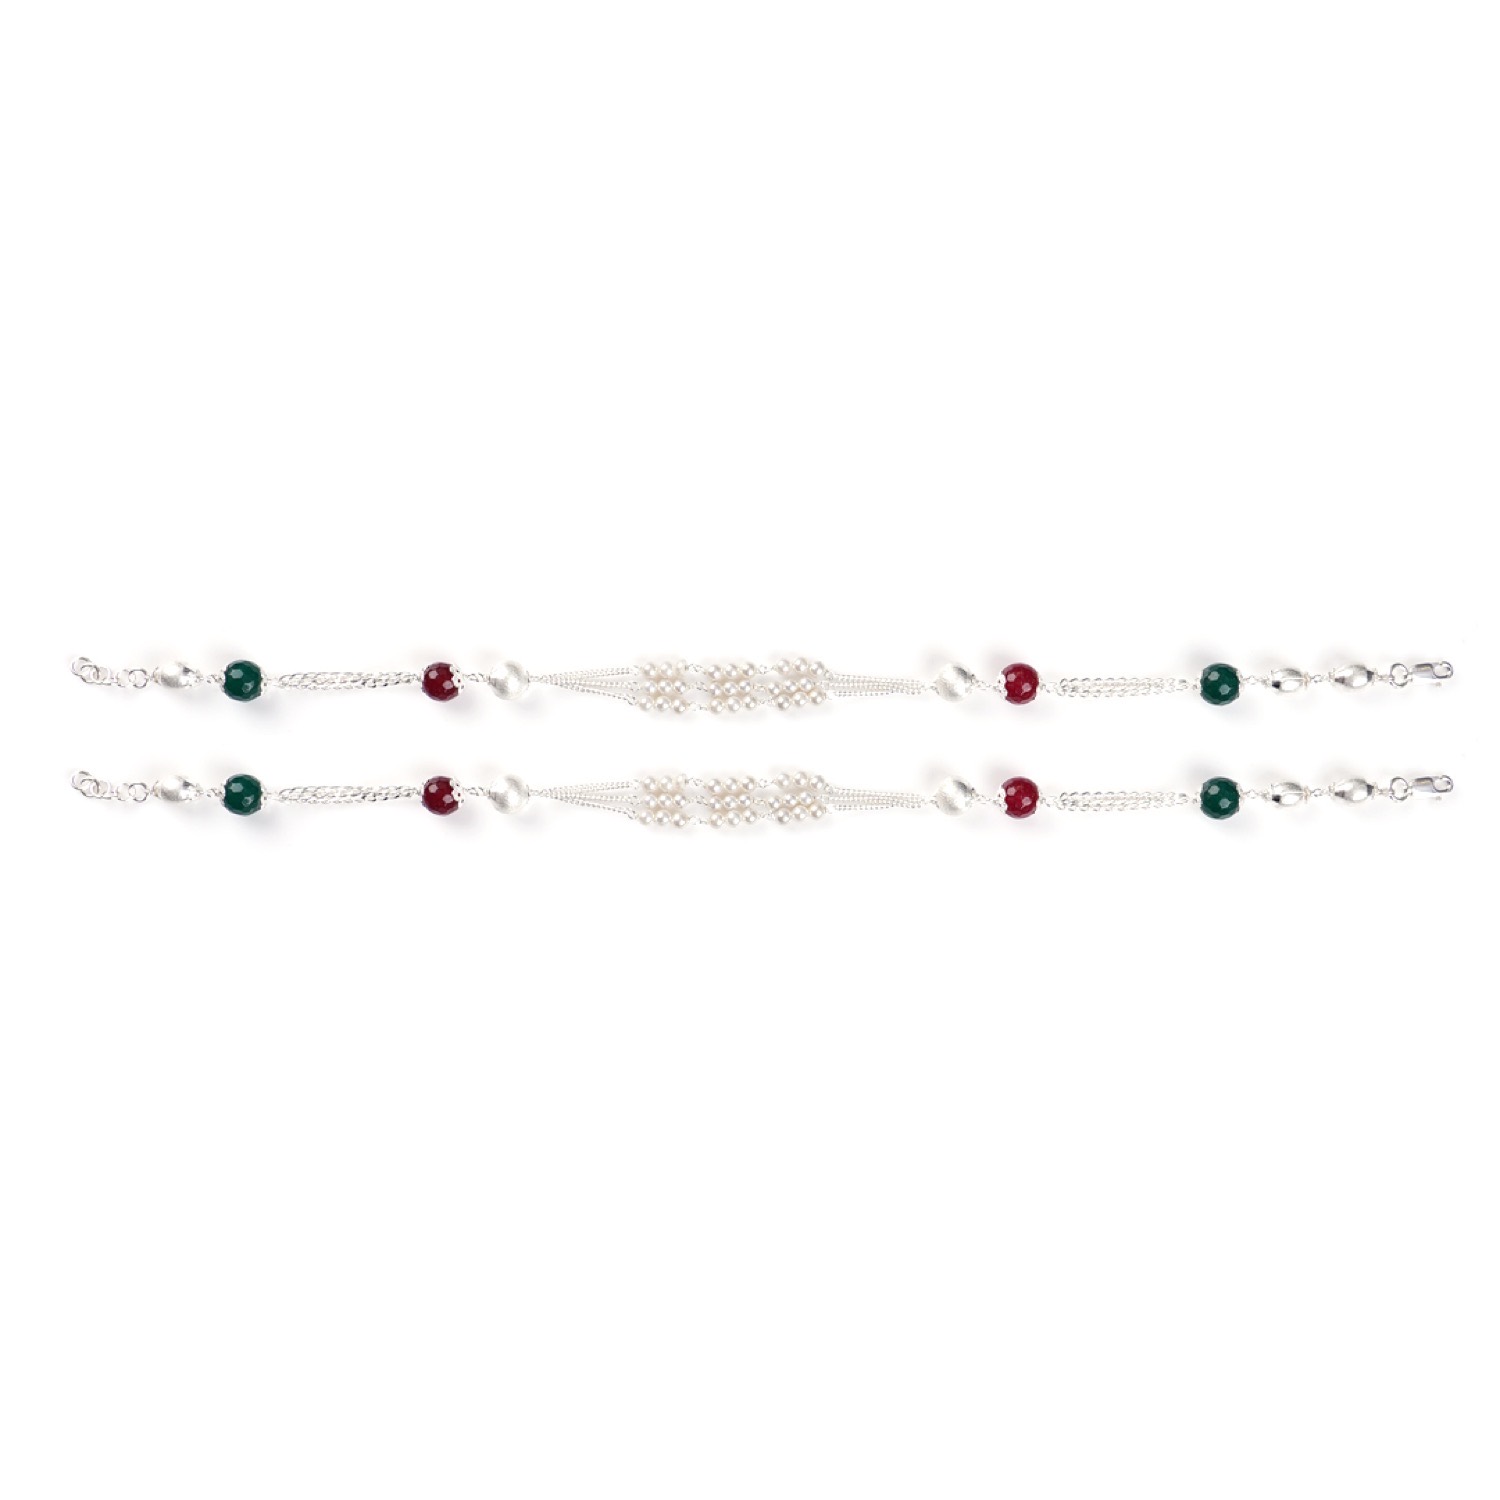 varam_anklets_072022_green_and_red_stone_silver_anklets_1-1